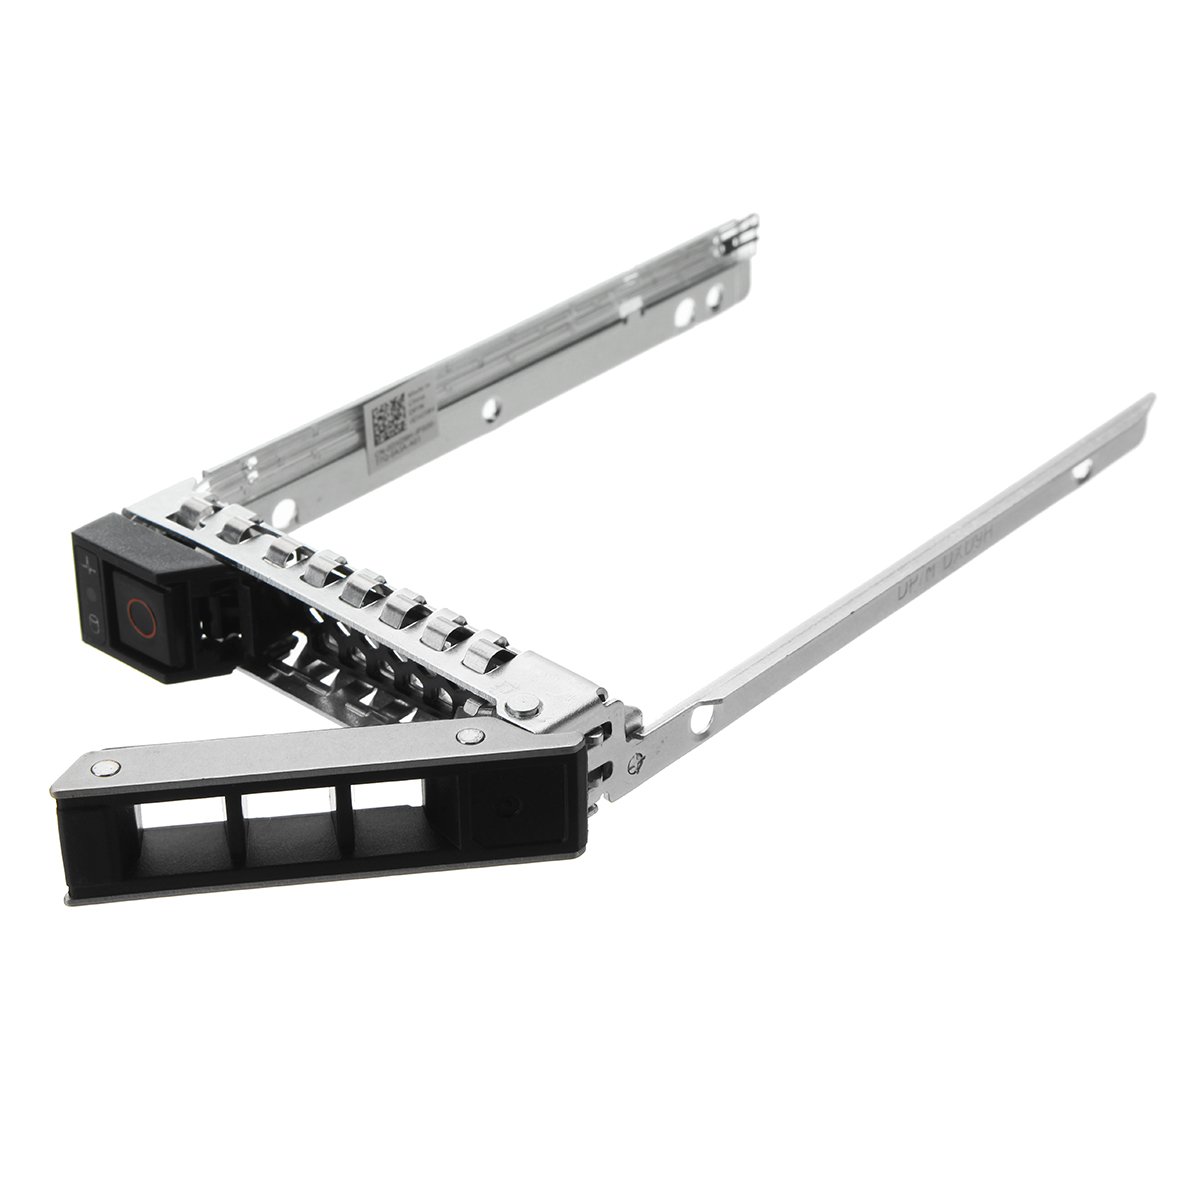 2.5'' HDD Tray Caddy for Dell DXD9H Poweredge Server R640 R740 R740XD R7415 R940 Adapter 1